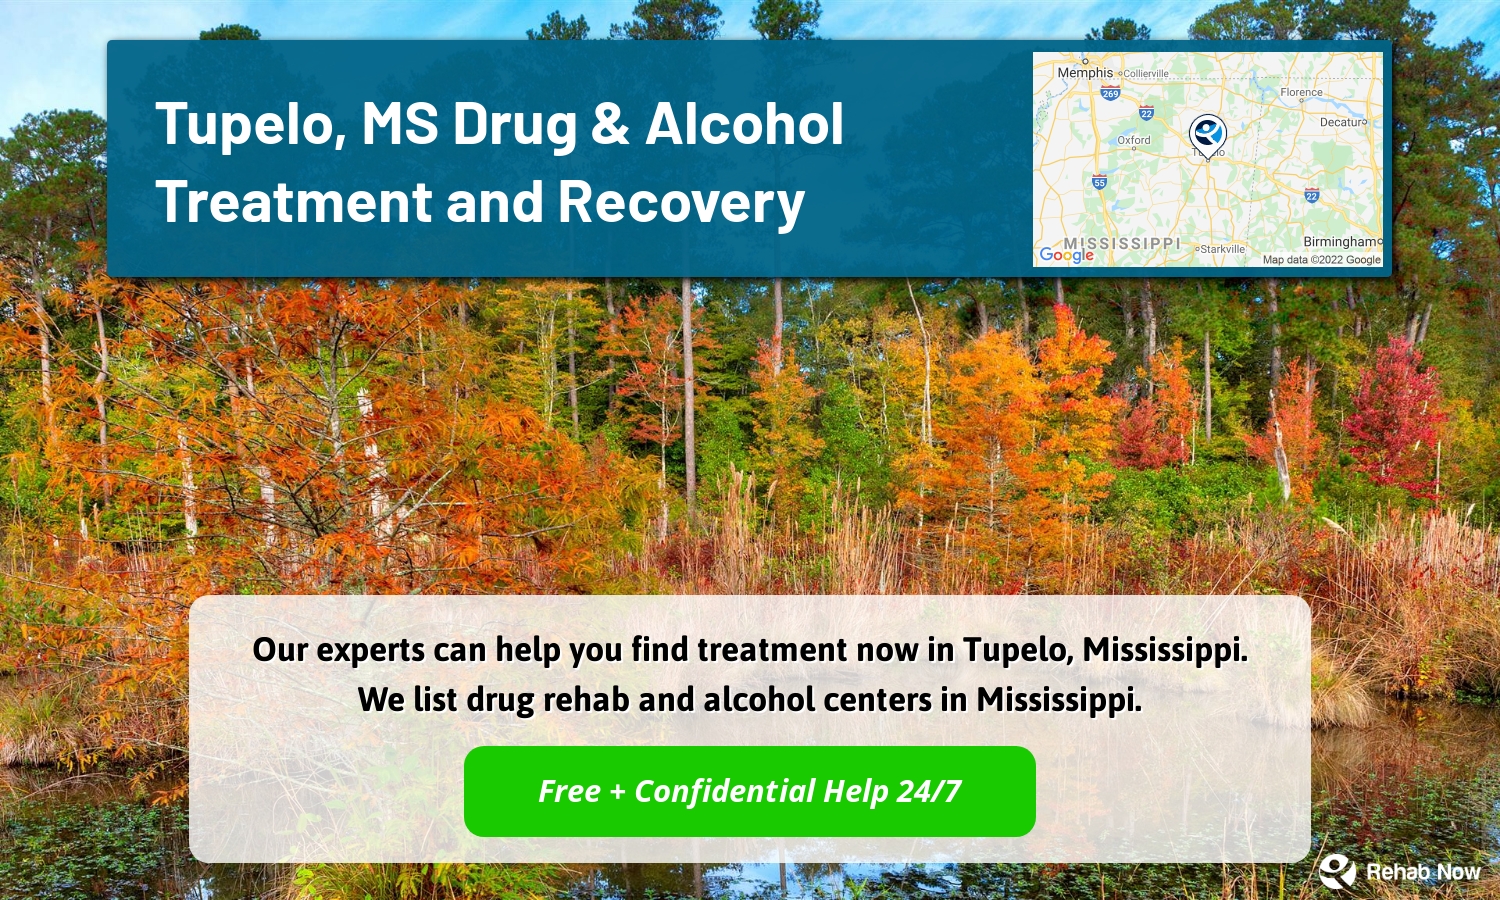 Our experts can help you find treatment now in Tupelo, Mississippi. We list drug rehab and alcohol centers in Mississippi.